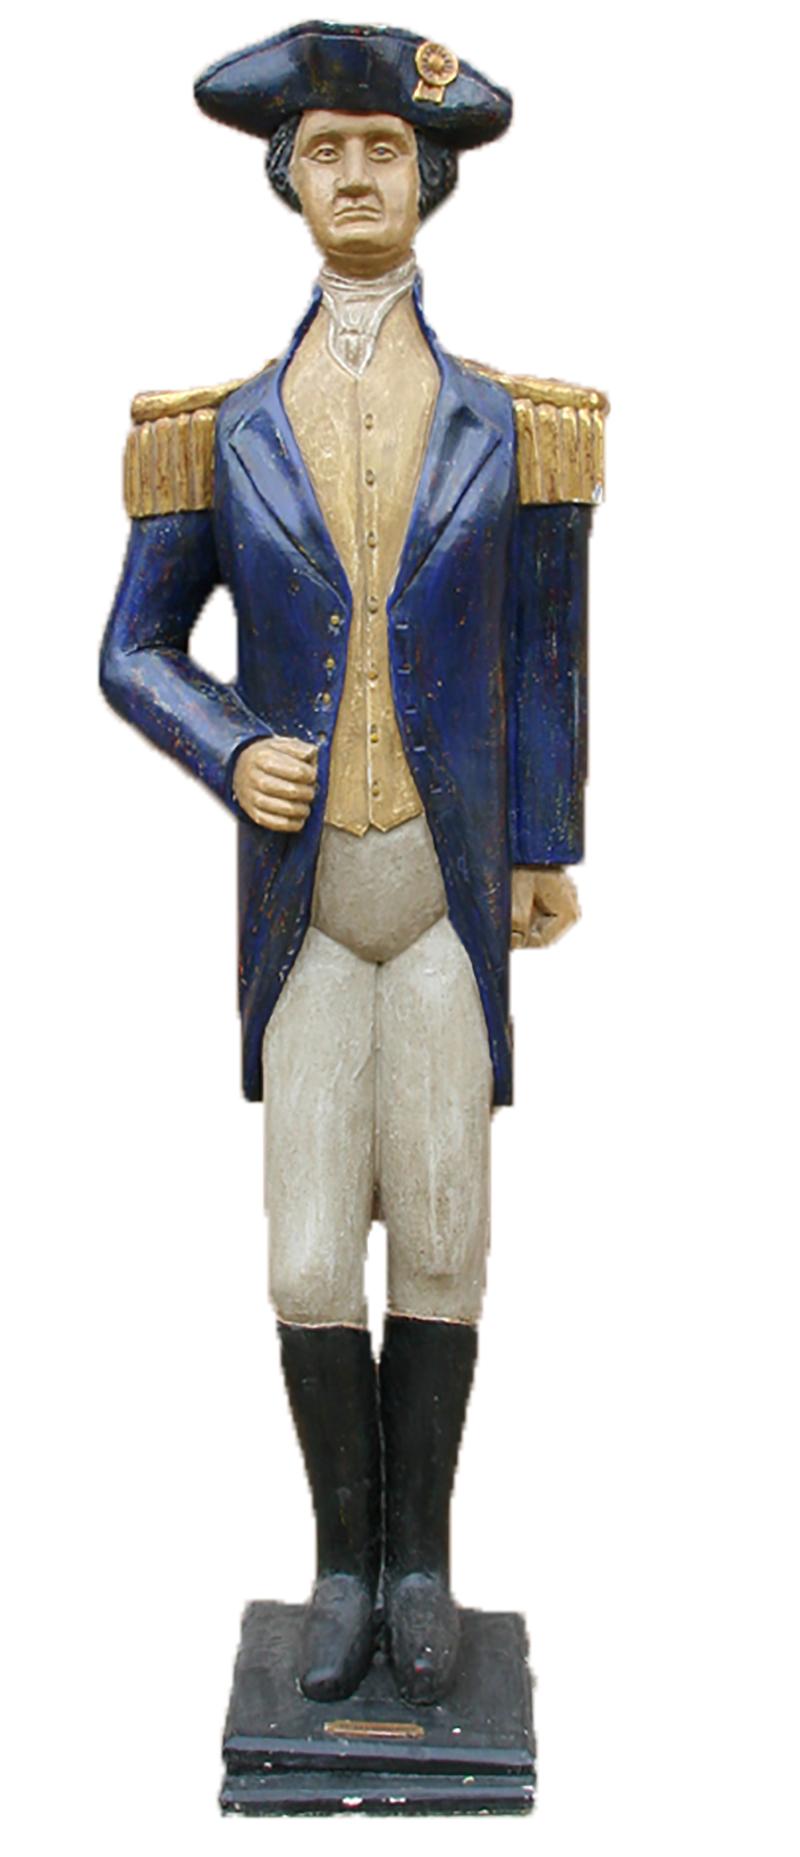 George Washington, Unique Carved and Painted Wooden Sculpture